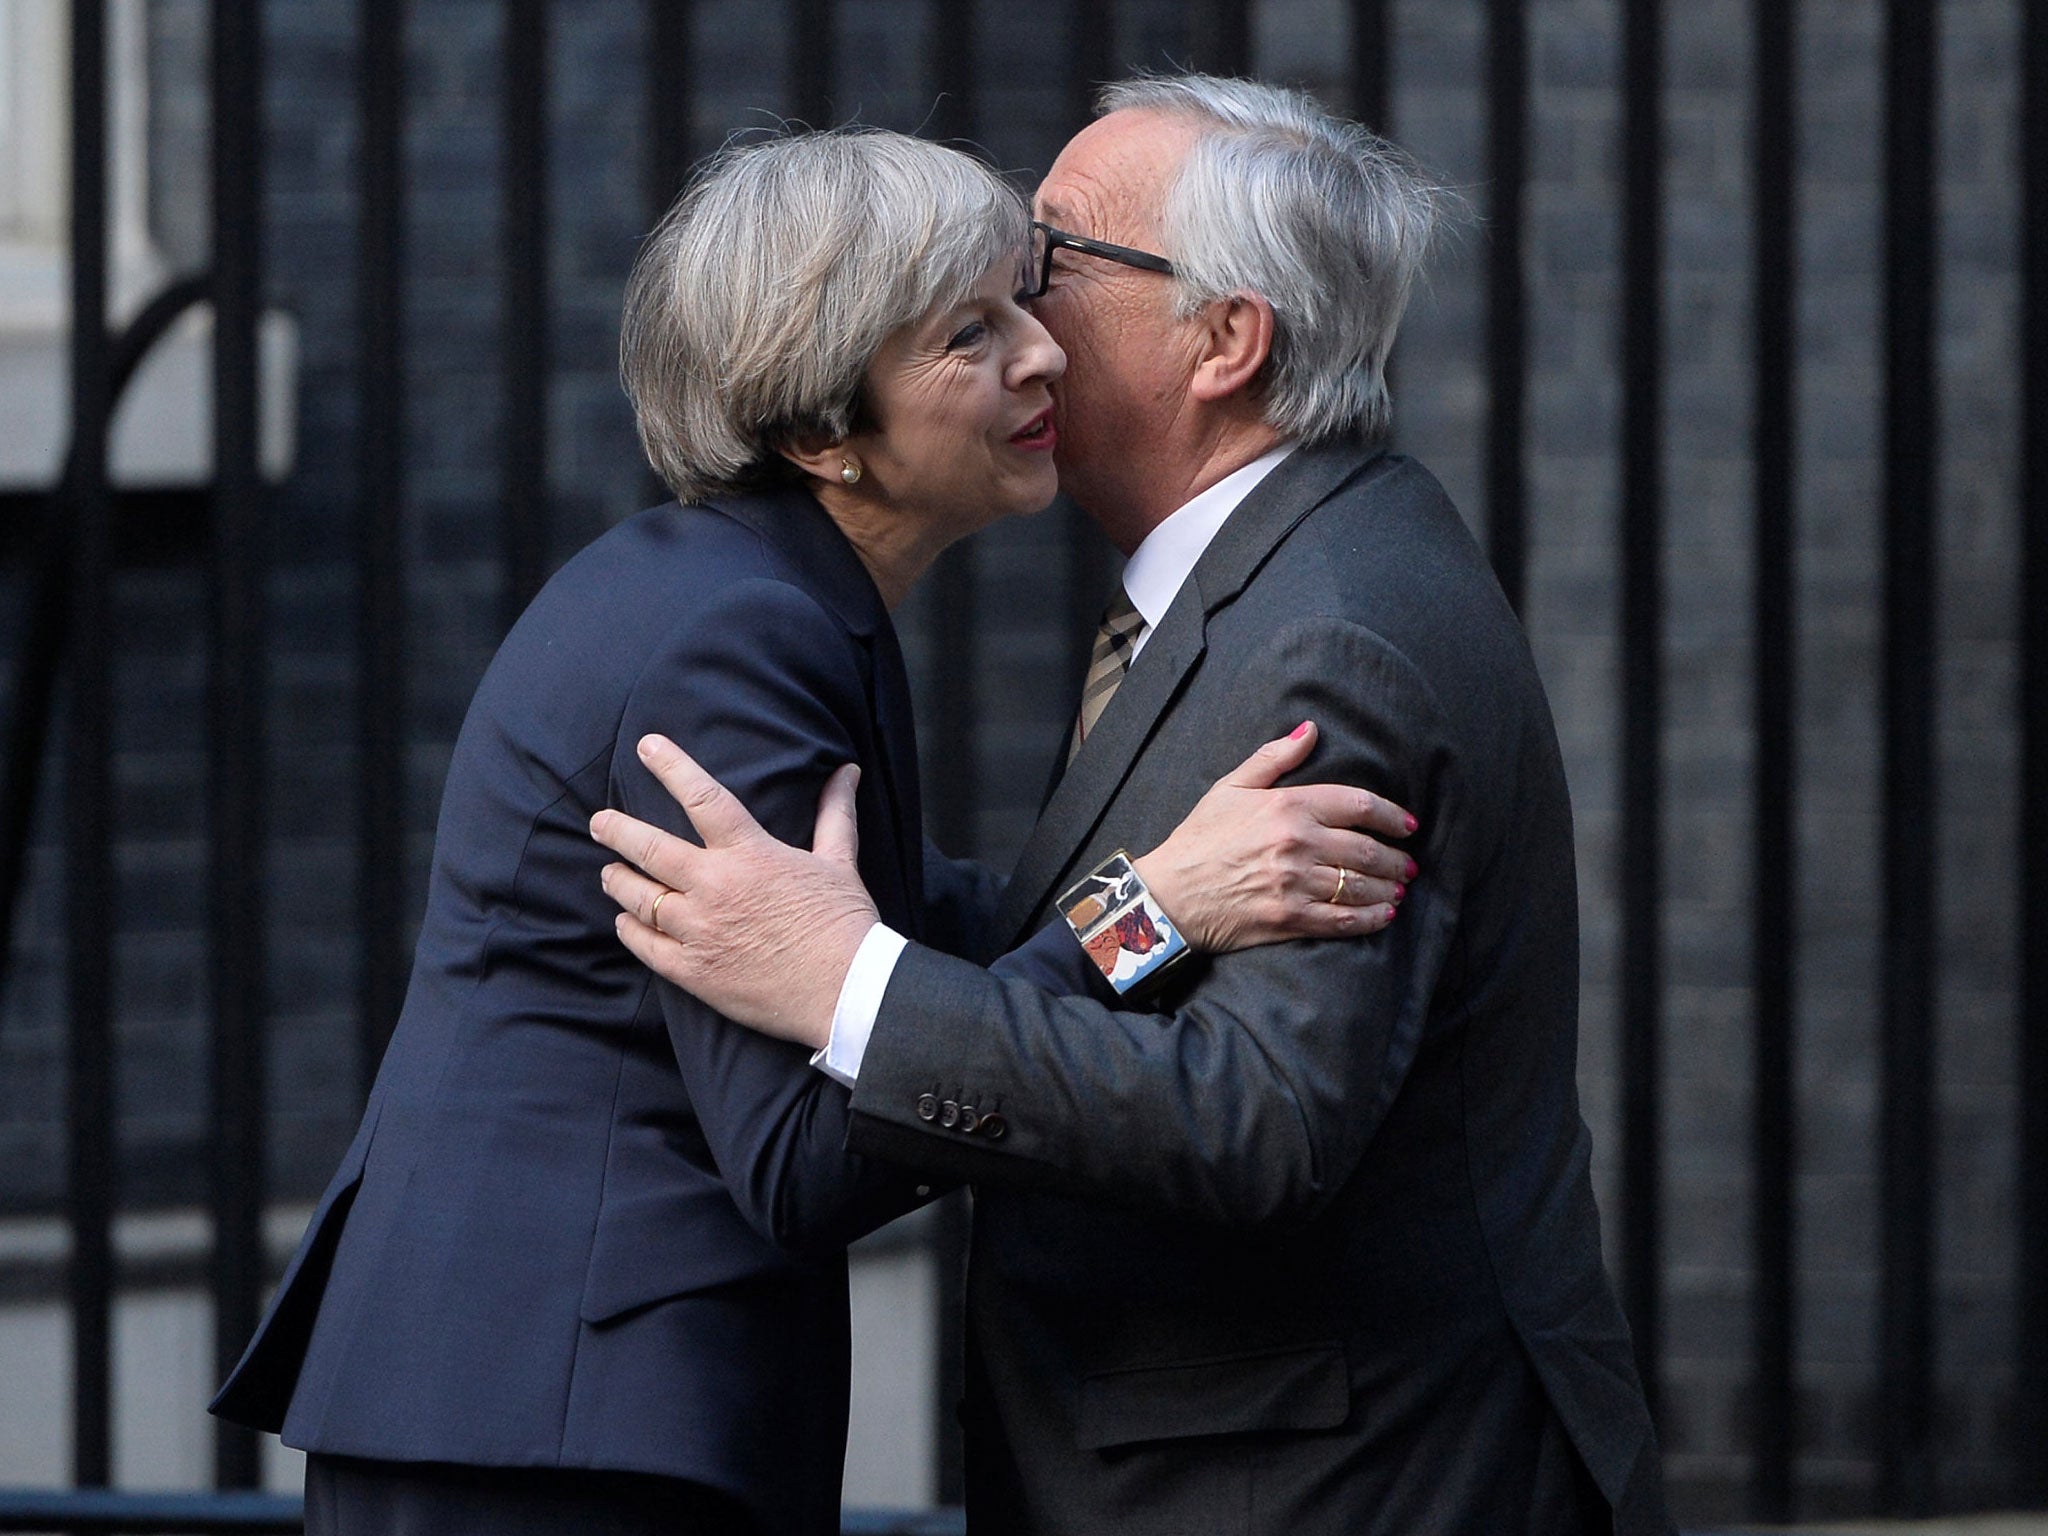 Theresa May held talks with the head of the European Commission, Jean-Claude Juncker, in Downing Street days after calling a general election